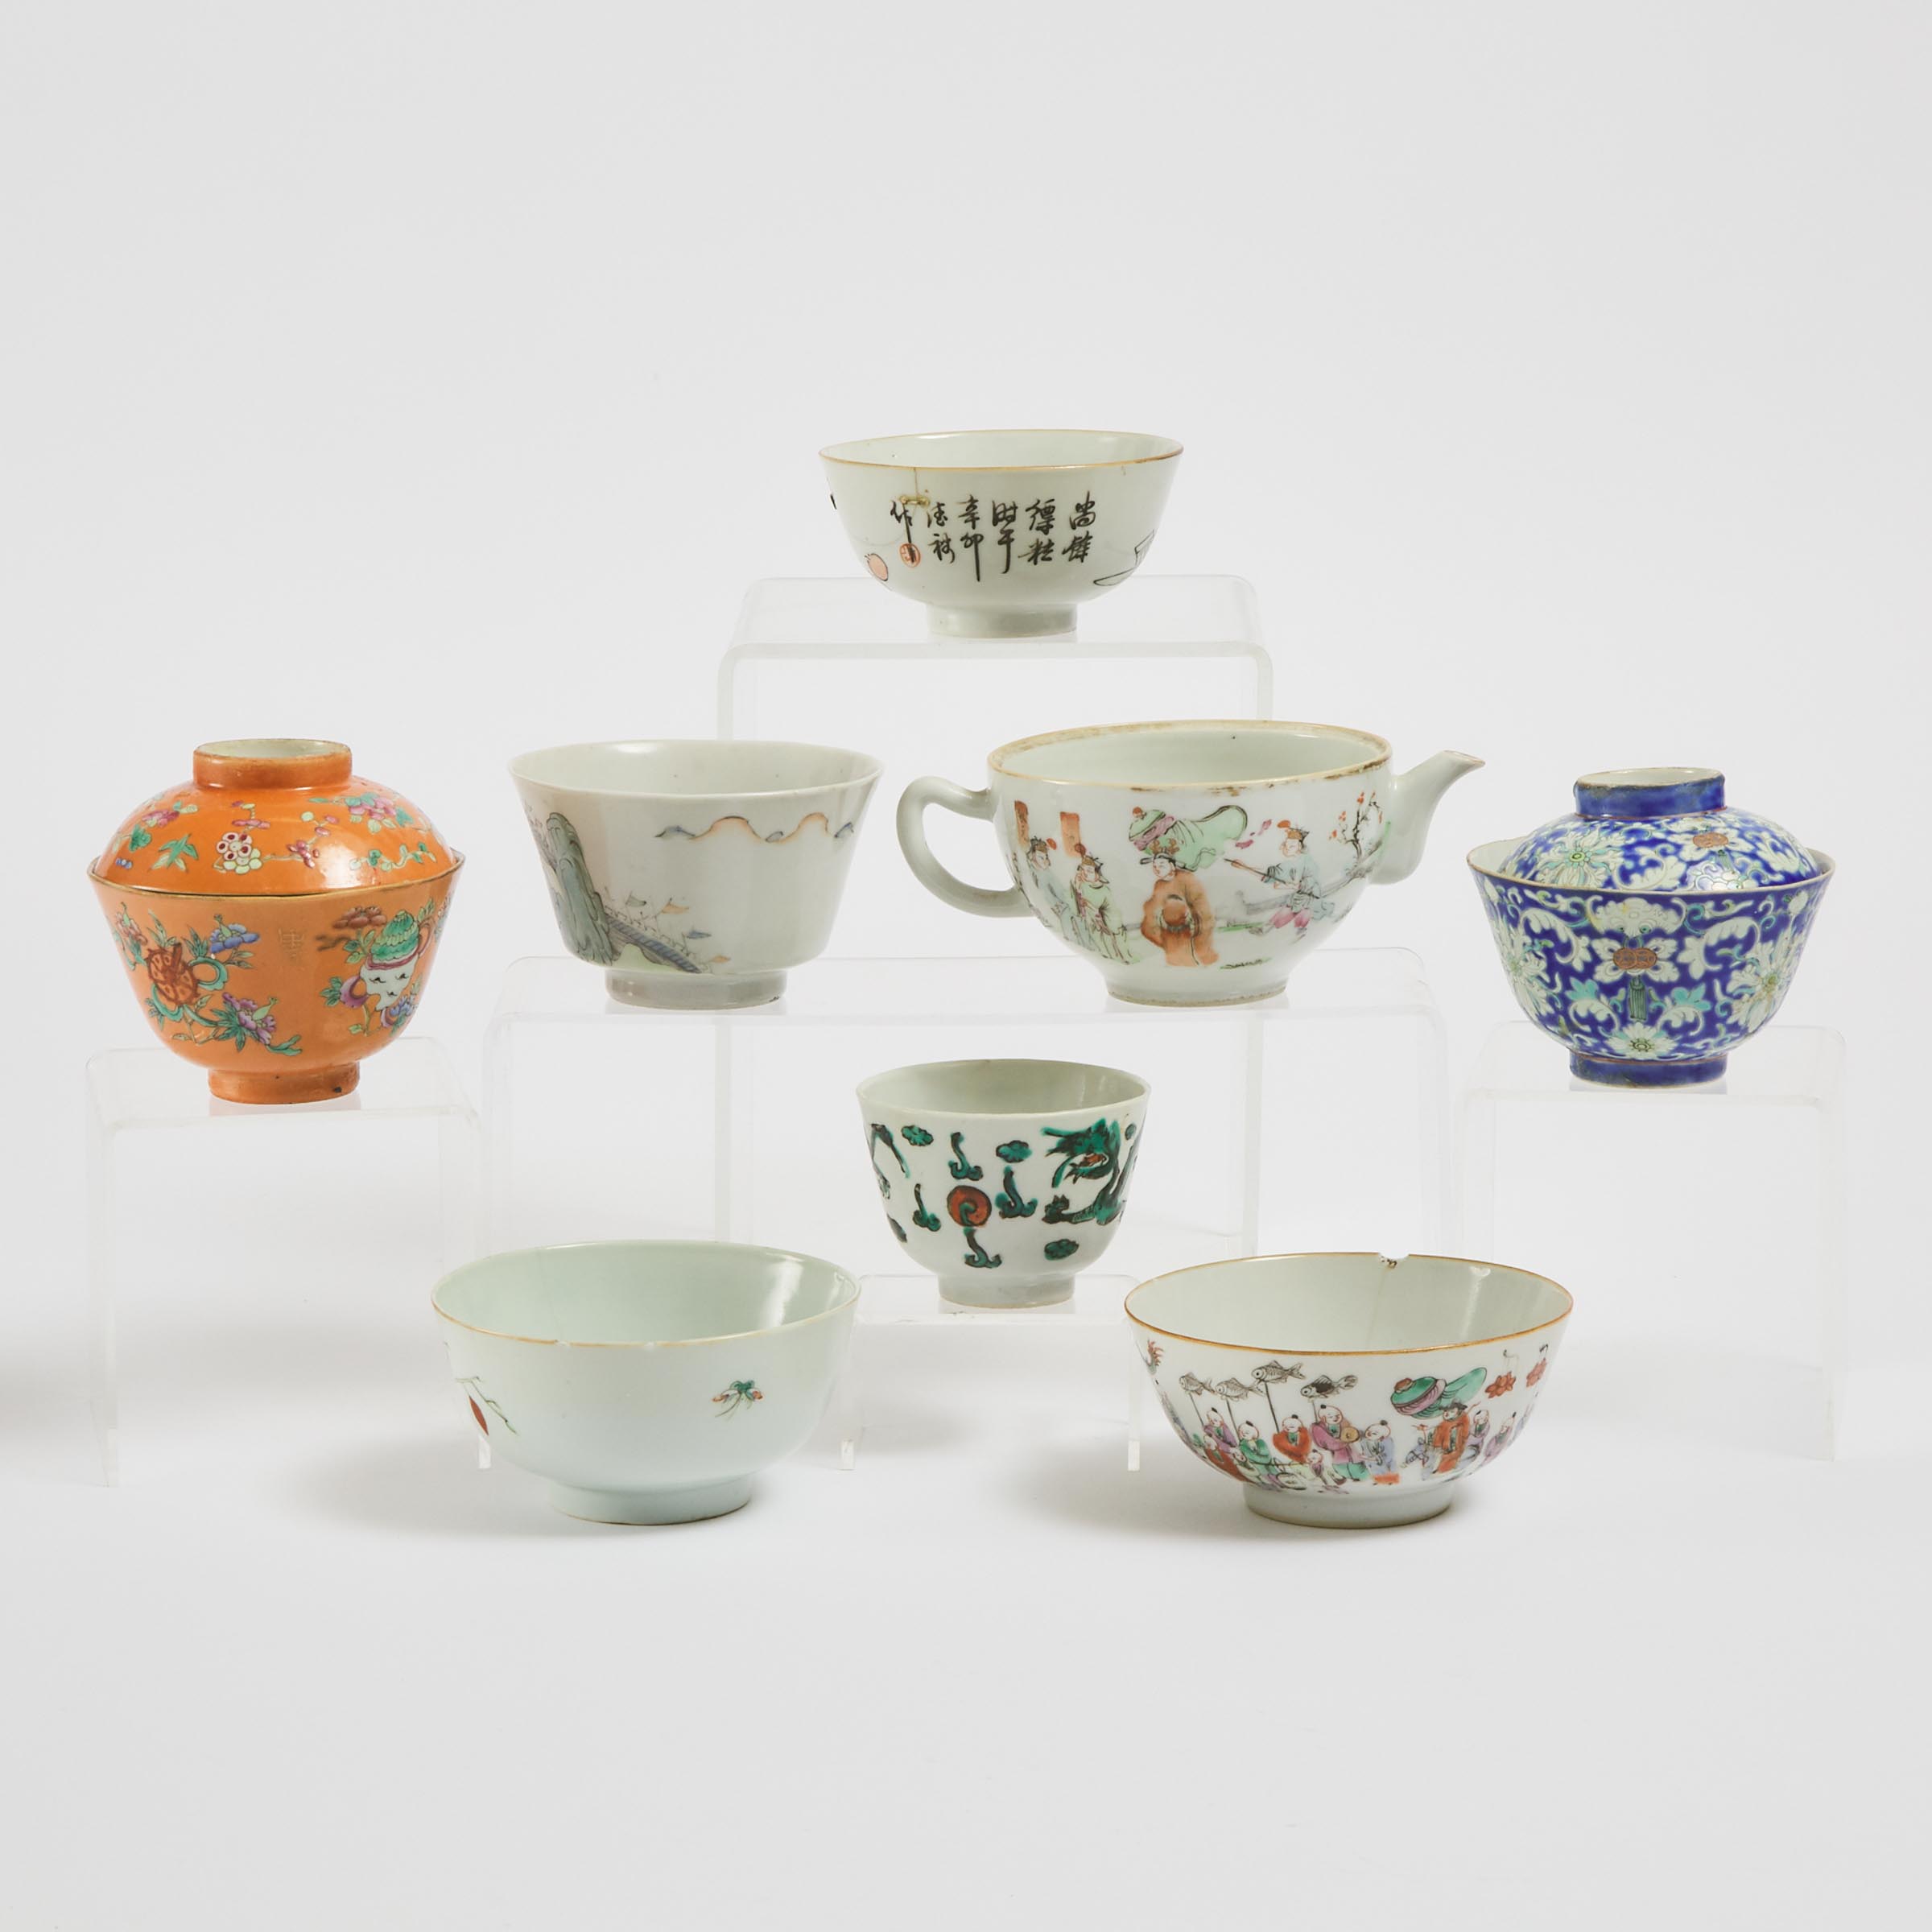 A Group of Eight Famille Rose Wares, Late Qing Dynasty